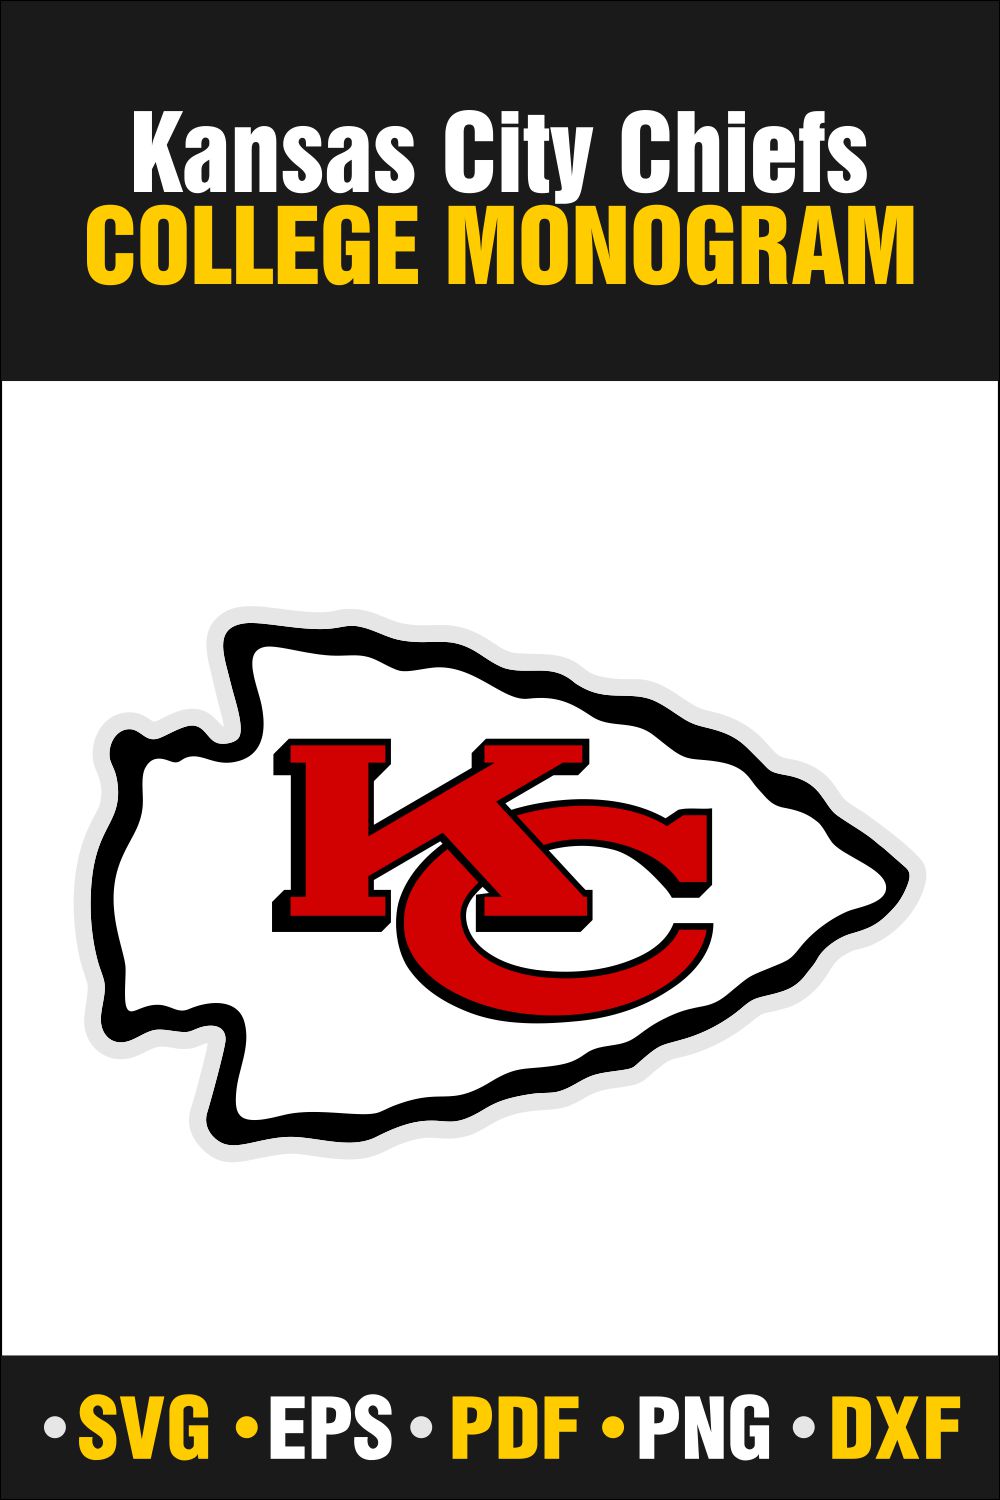 Kansas City Chiefs SVG, PDF, PNG, DXF, EPS - Only $2 pinterest preview image.